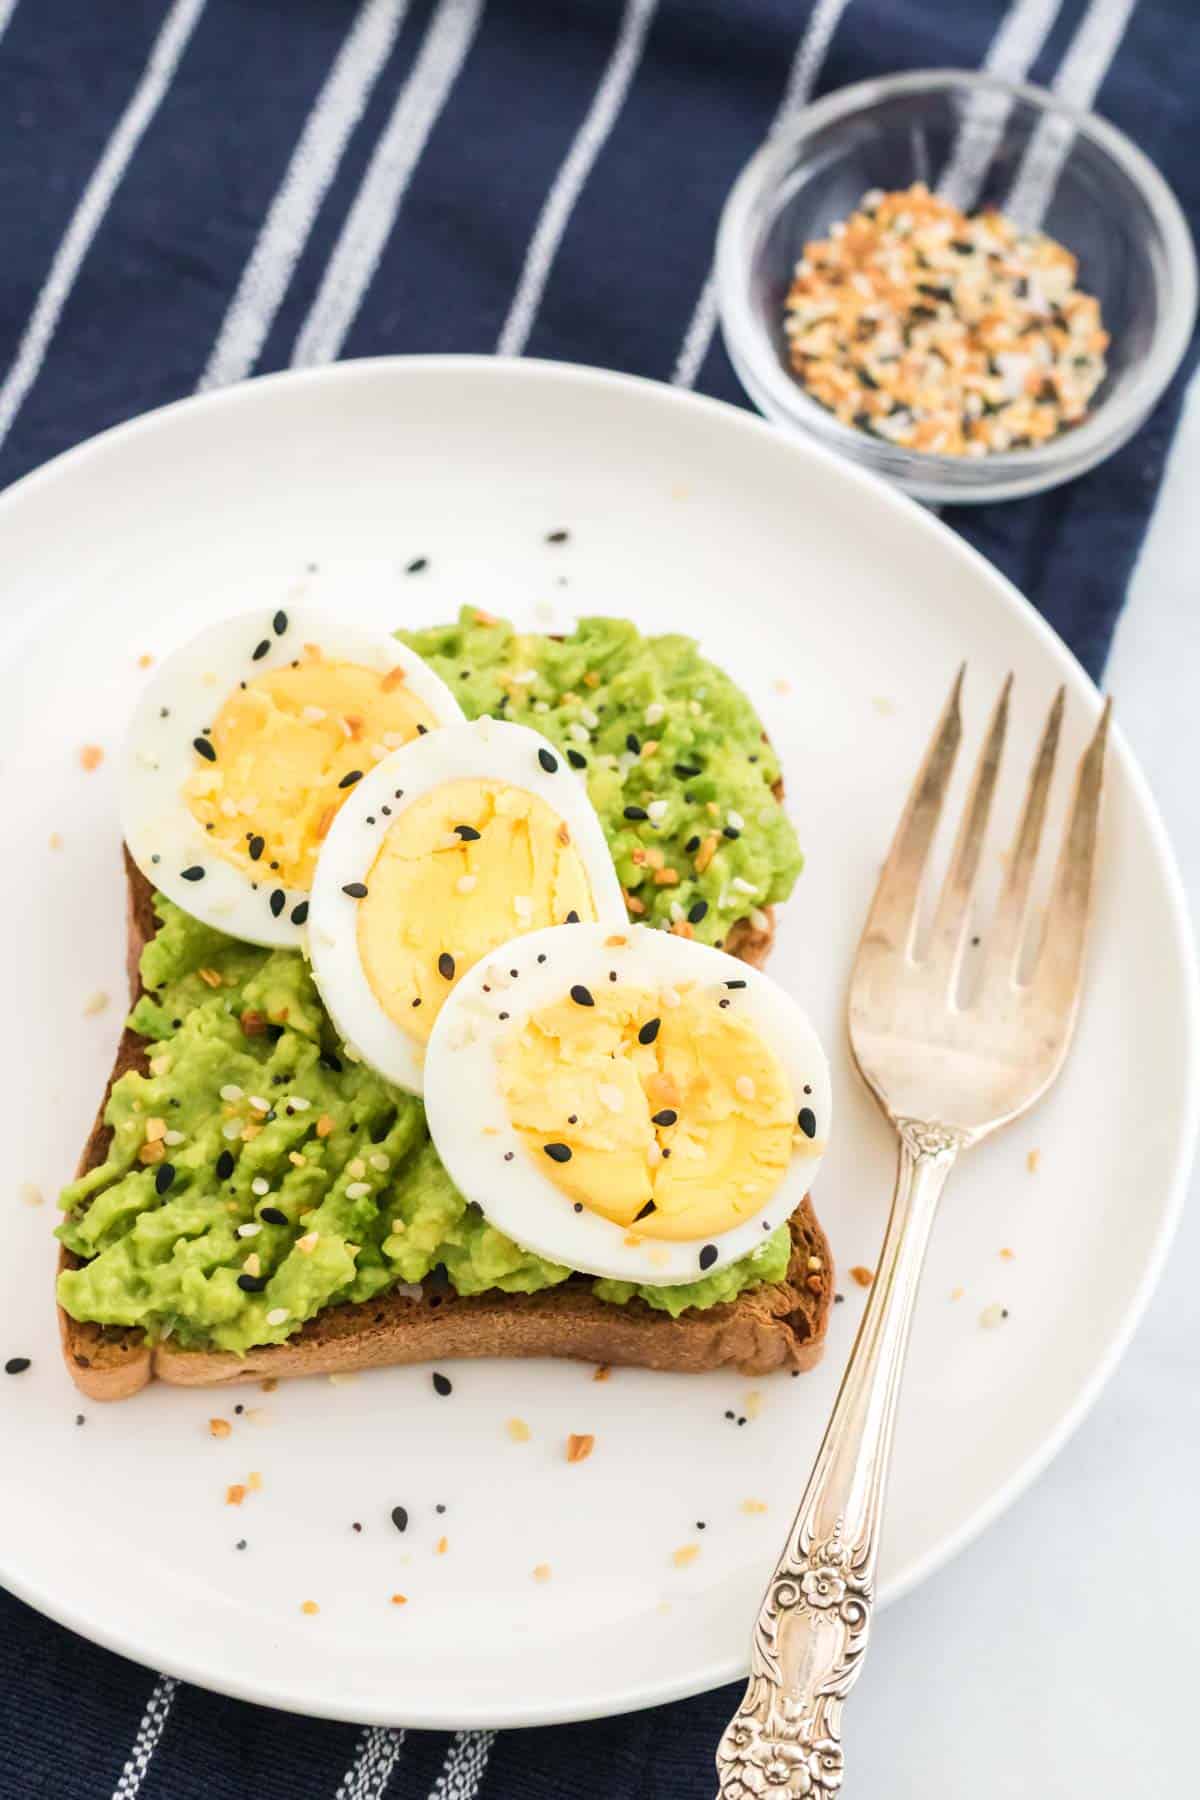 Avocado toast topped with sliced eggs and seasoning on a plate with a fork.